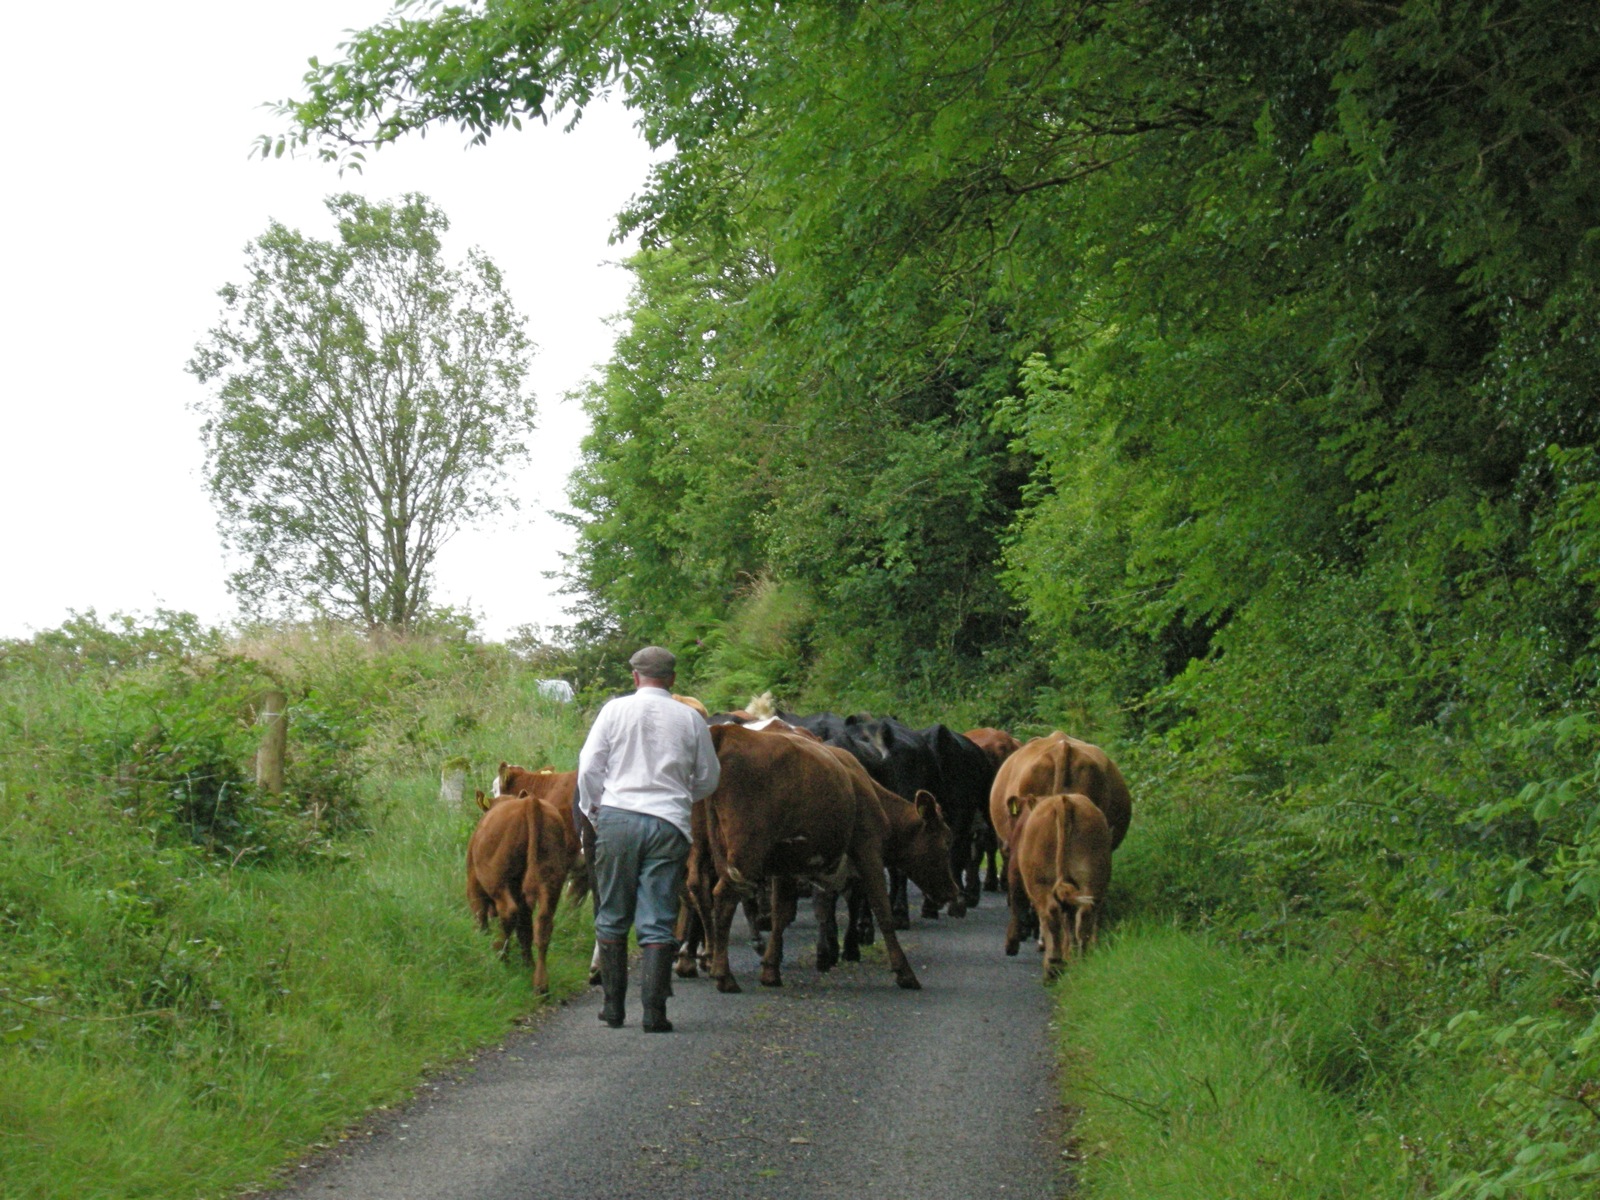 cattle walk down the road as a man herds them